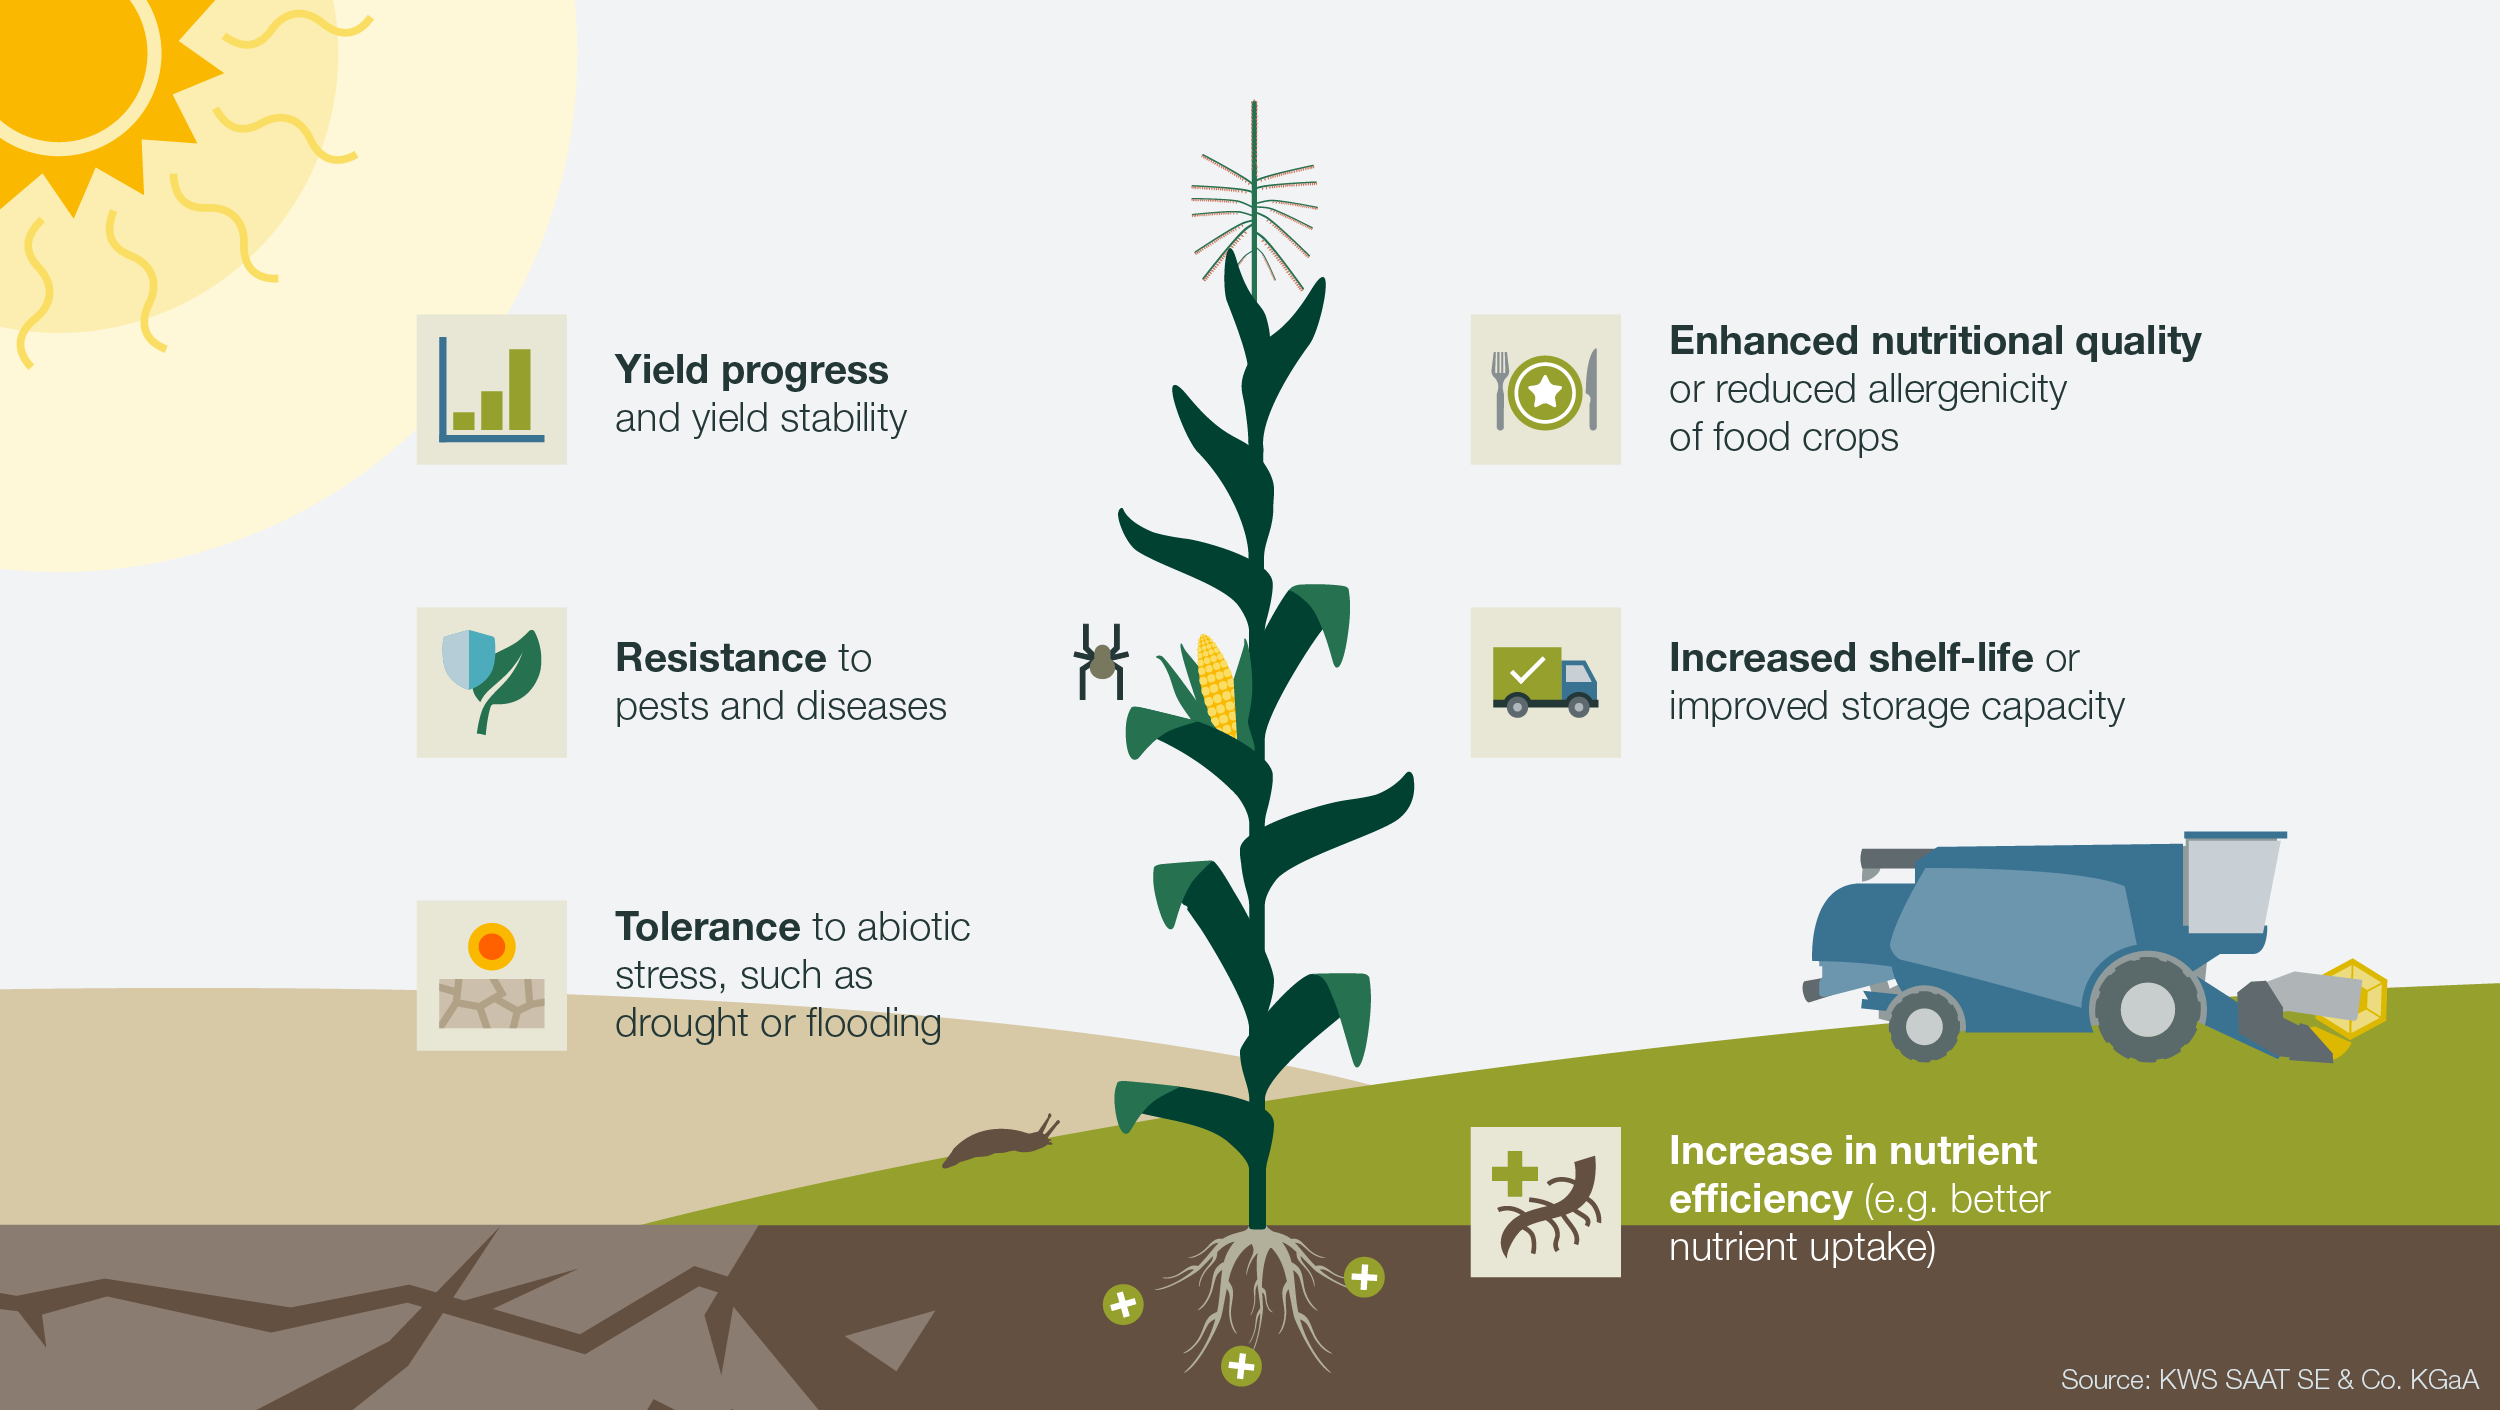 Infographic illustration showing how genome editing can be applied towards new crops with beneficial traits